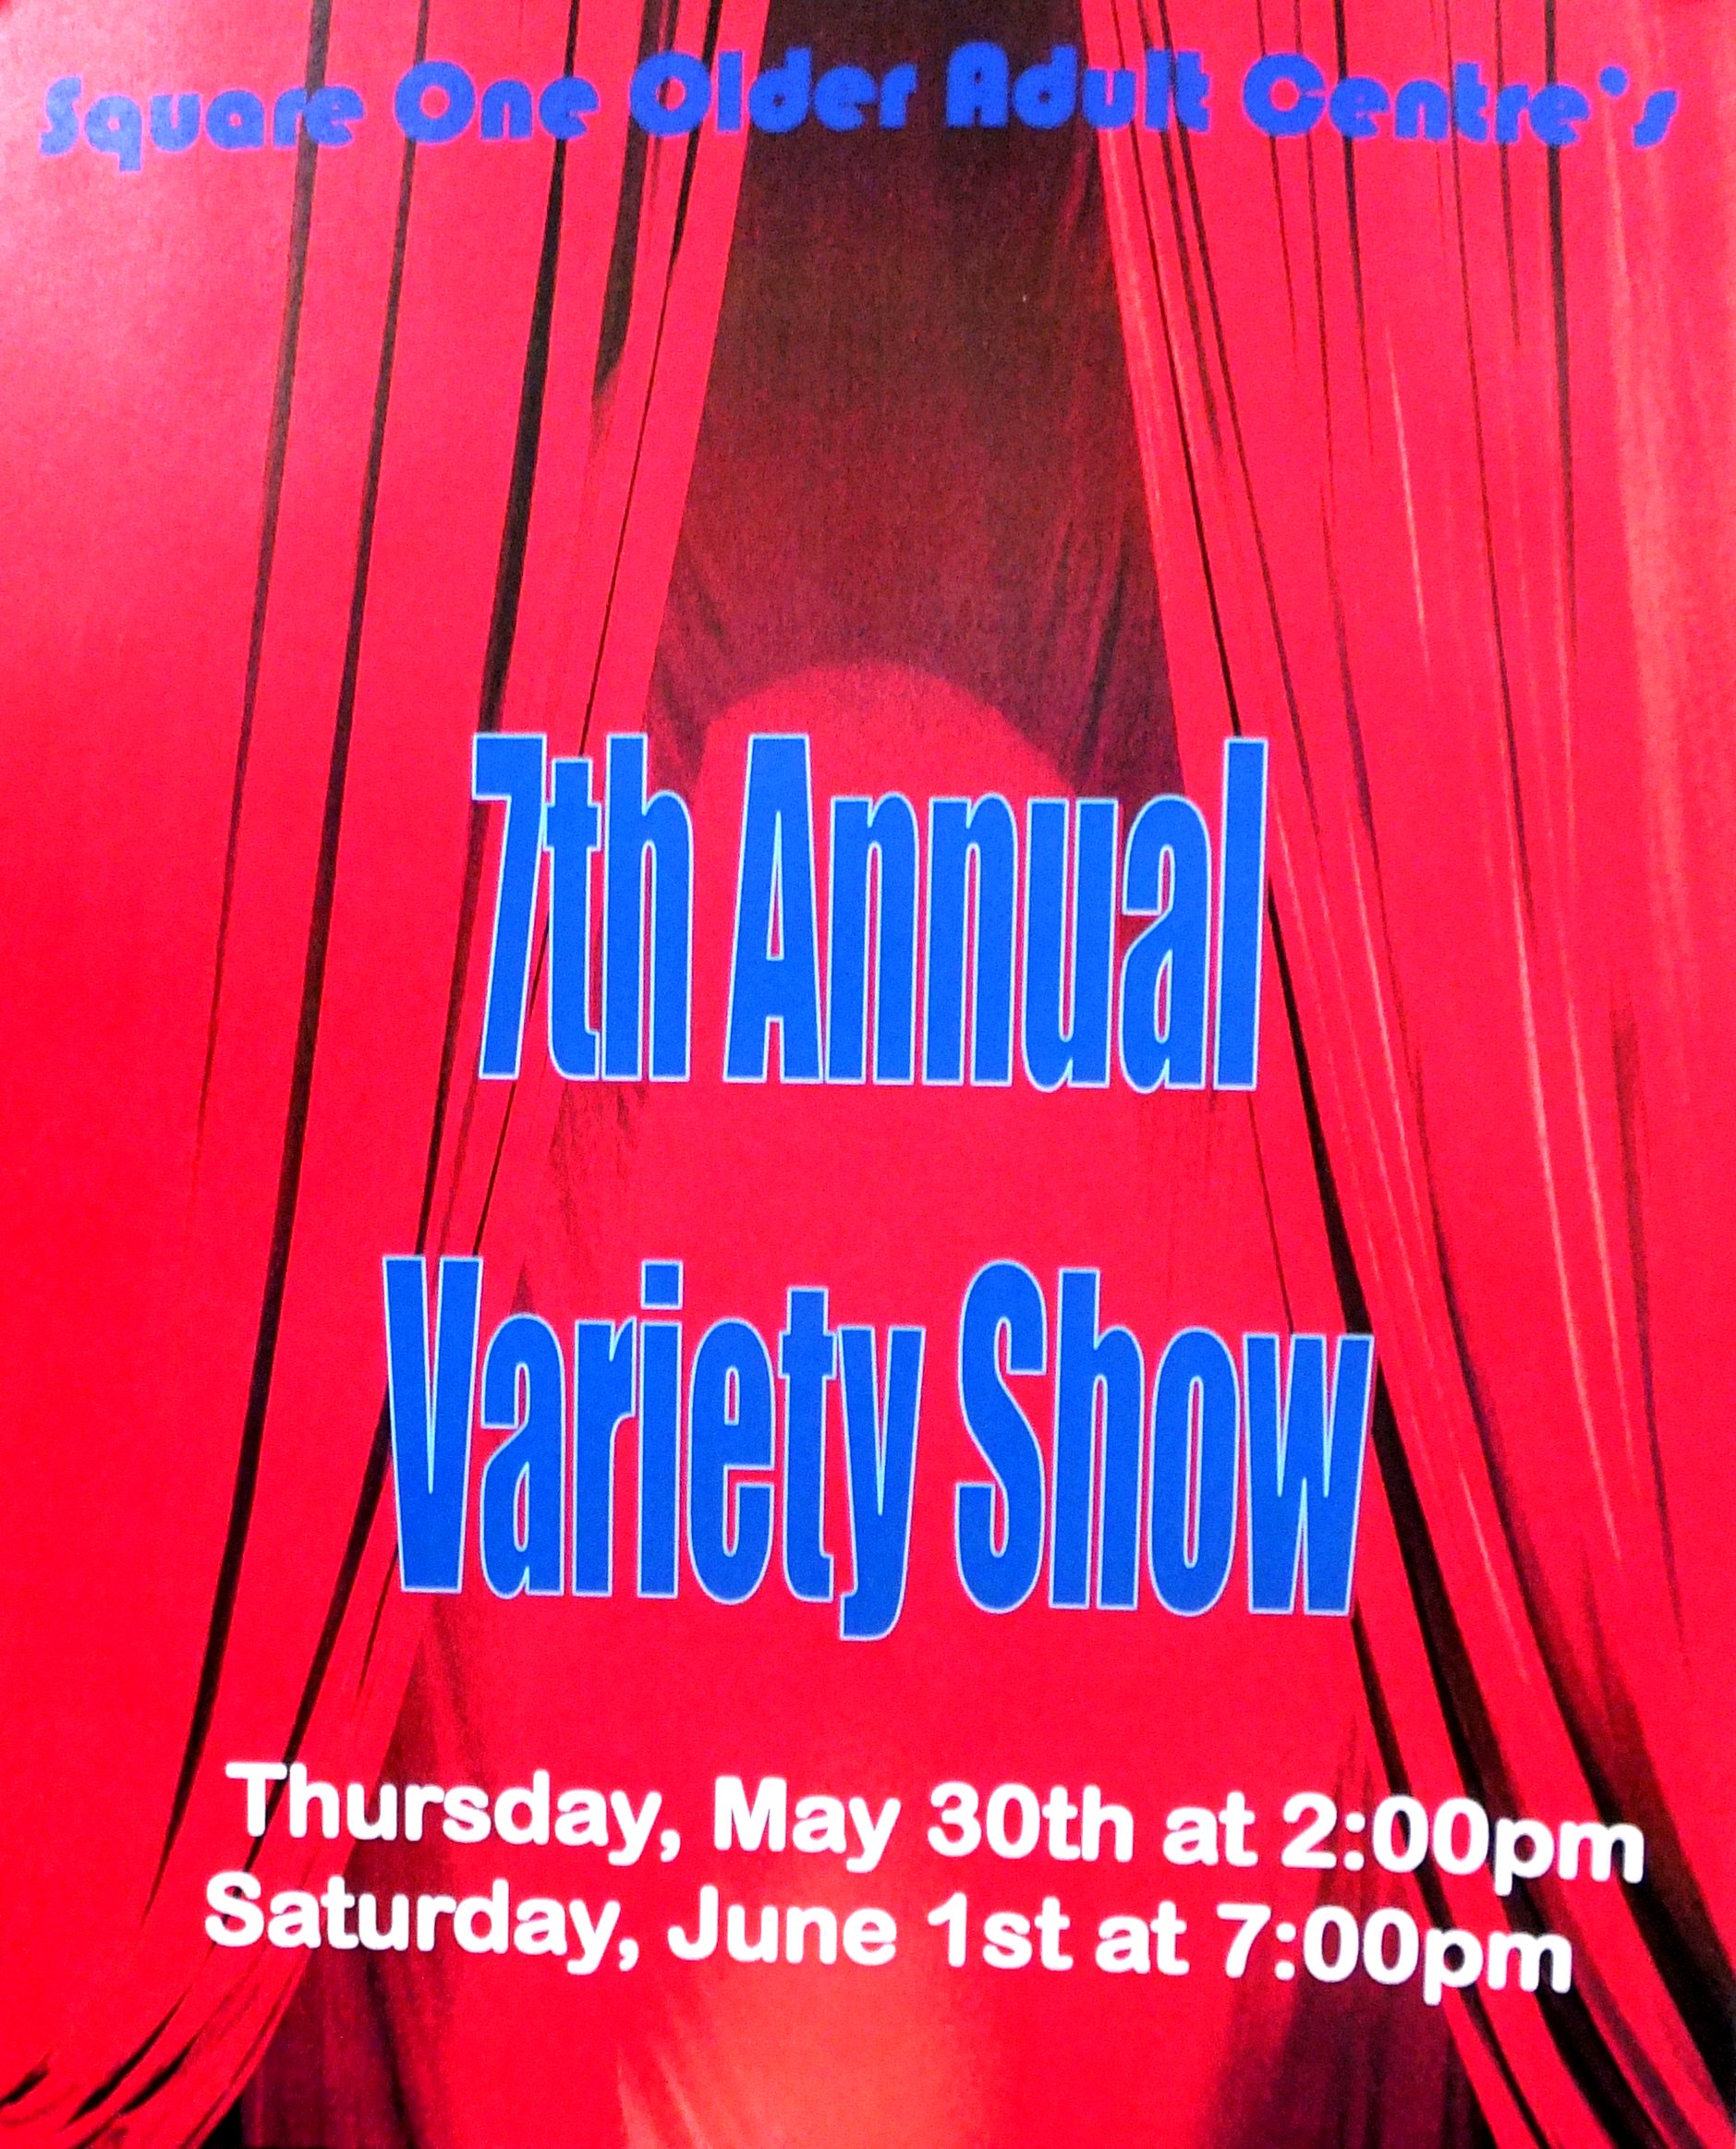 Older Adult Centre's 7th Annual Variety Show image from Sq1OAC Bulletin Board Photo by I Lee 23 May 2013